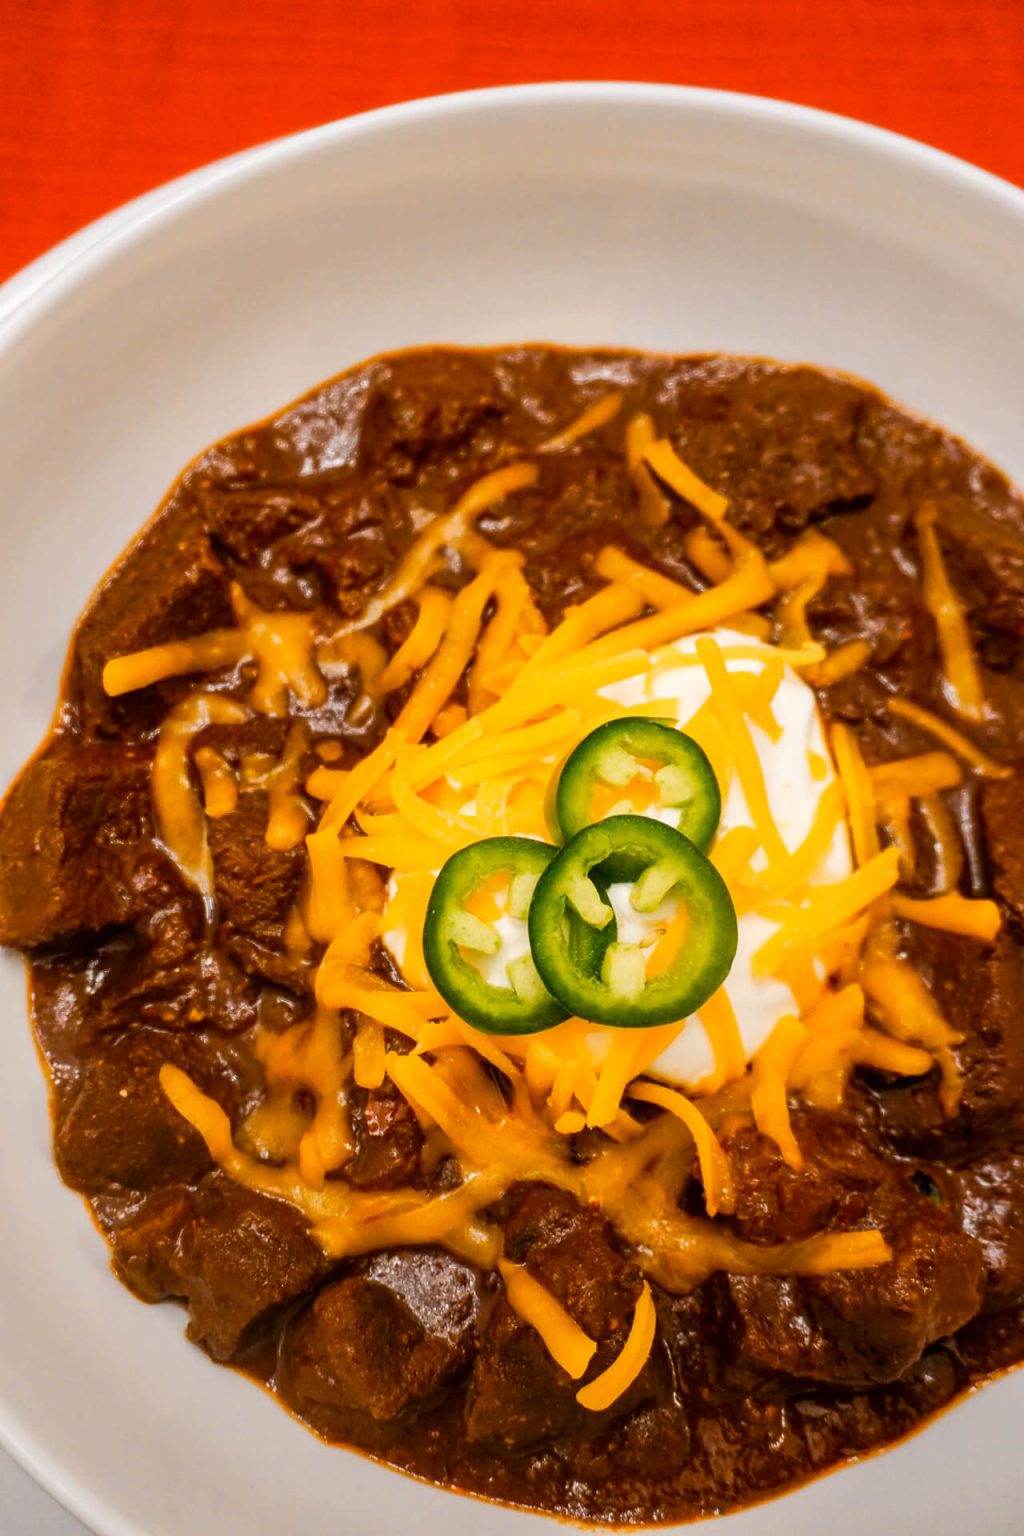 The Best Texas Chili - Authentic Recipe from a Born and Raised Texan